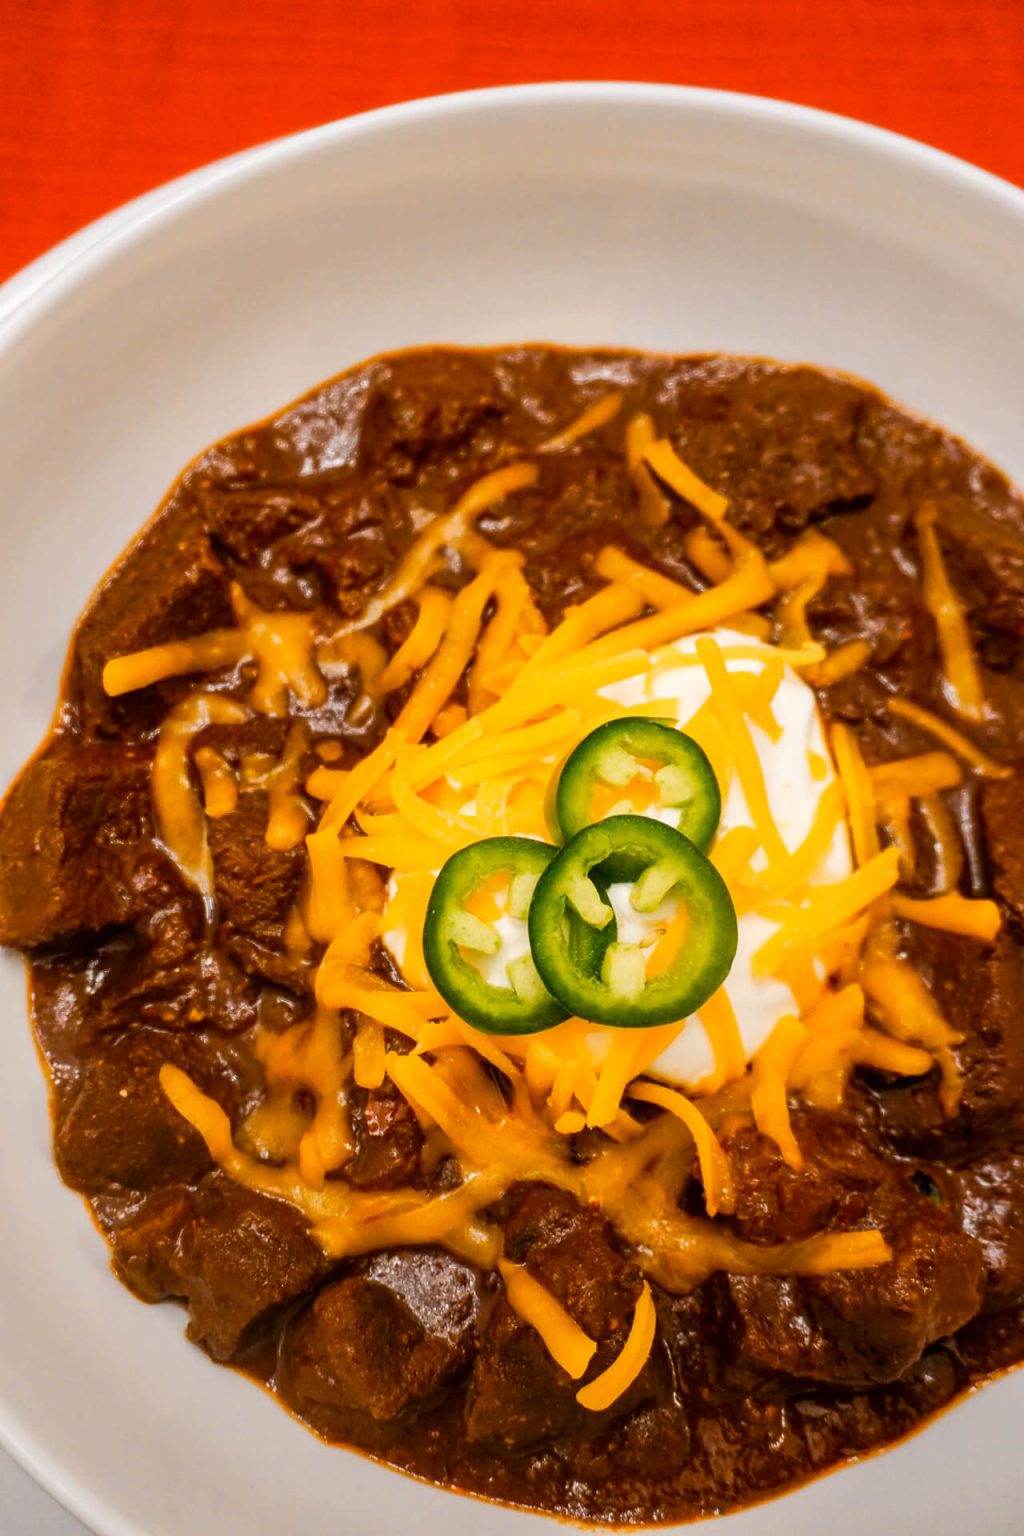 The Best Texas Chili - Authentic Recipe from a Born and Raised Texan